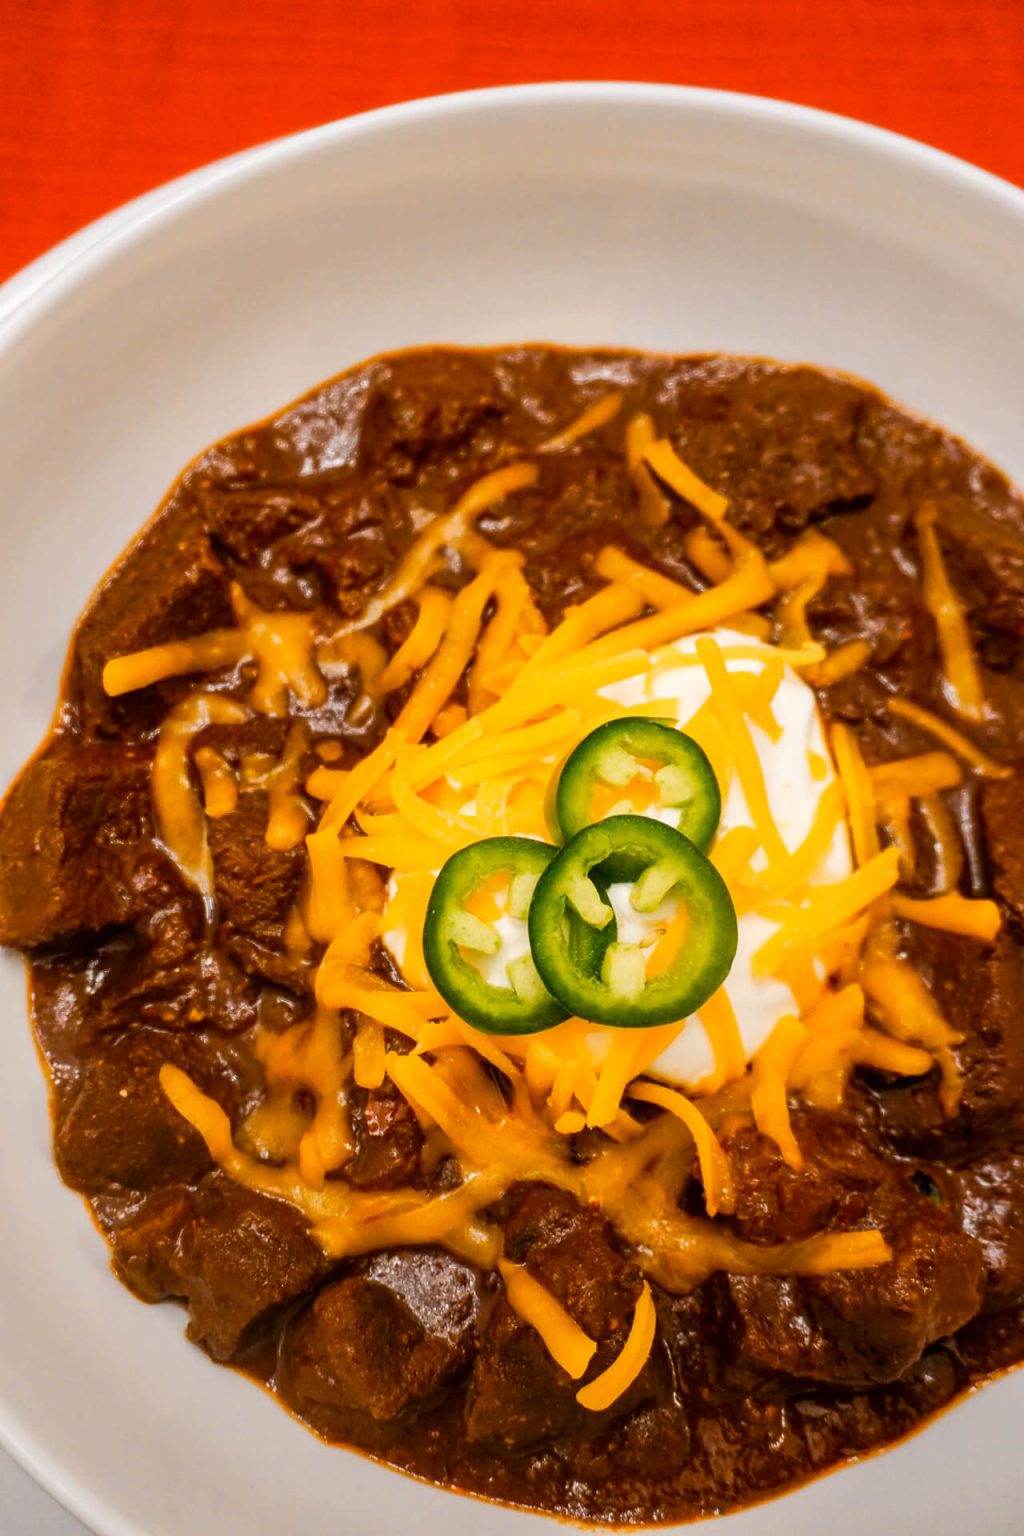 The Best Texas Chili - Authentic Recipe from a Born and Raised Texan